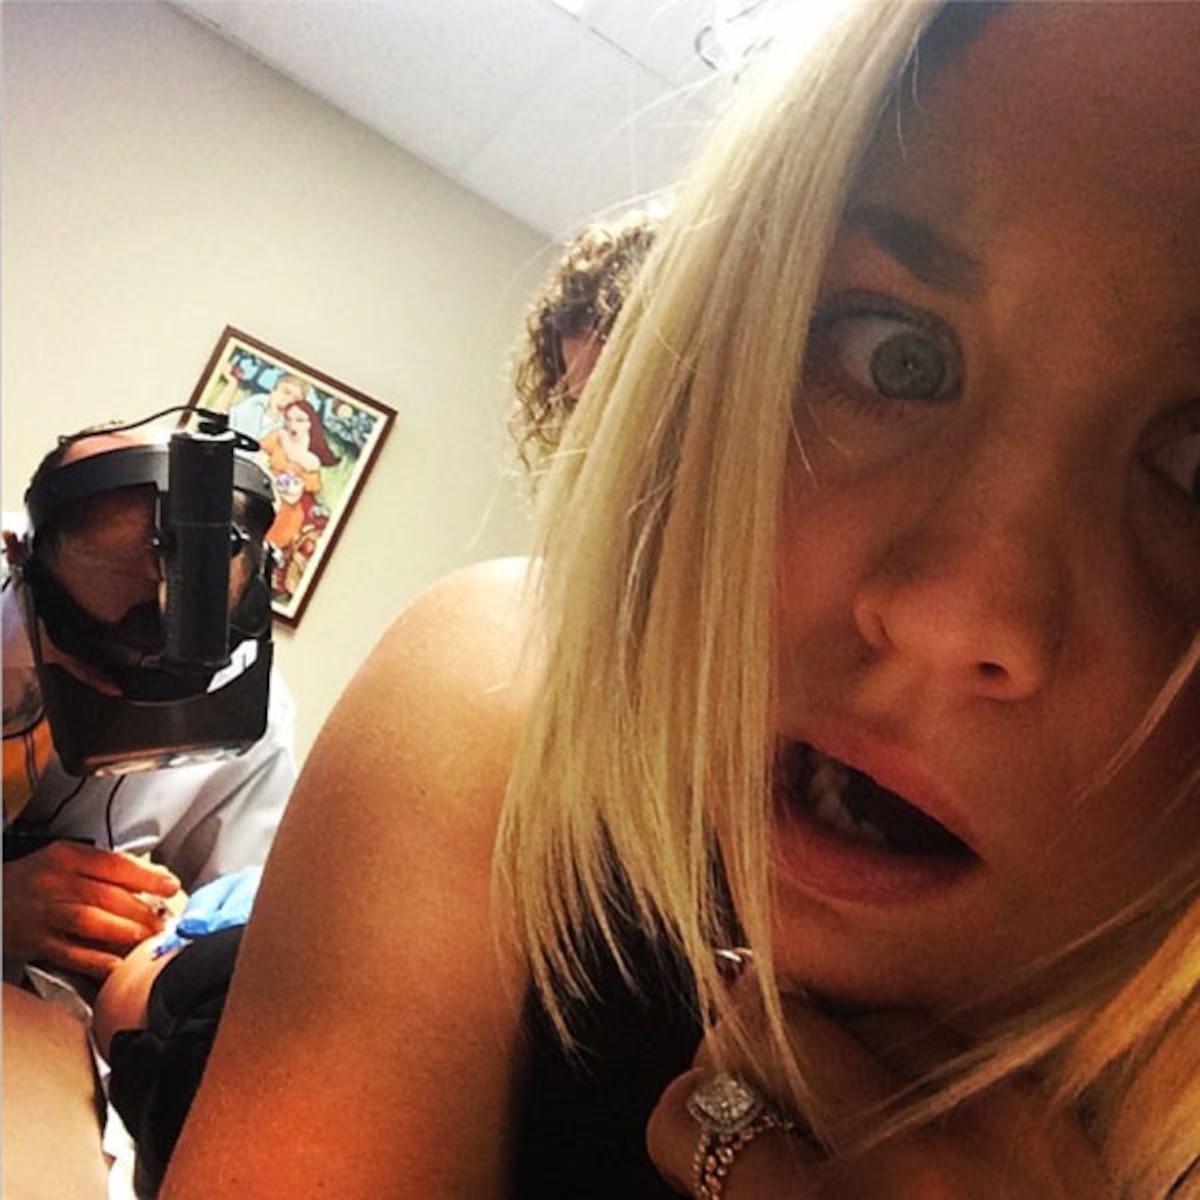 chelsea mcmahan add photo kaley cuoco snap chat